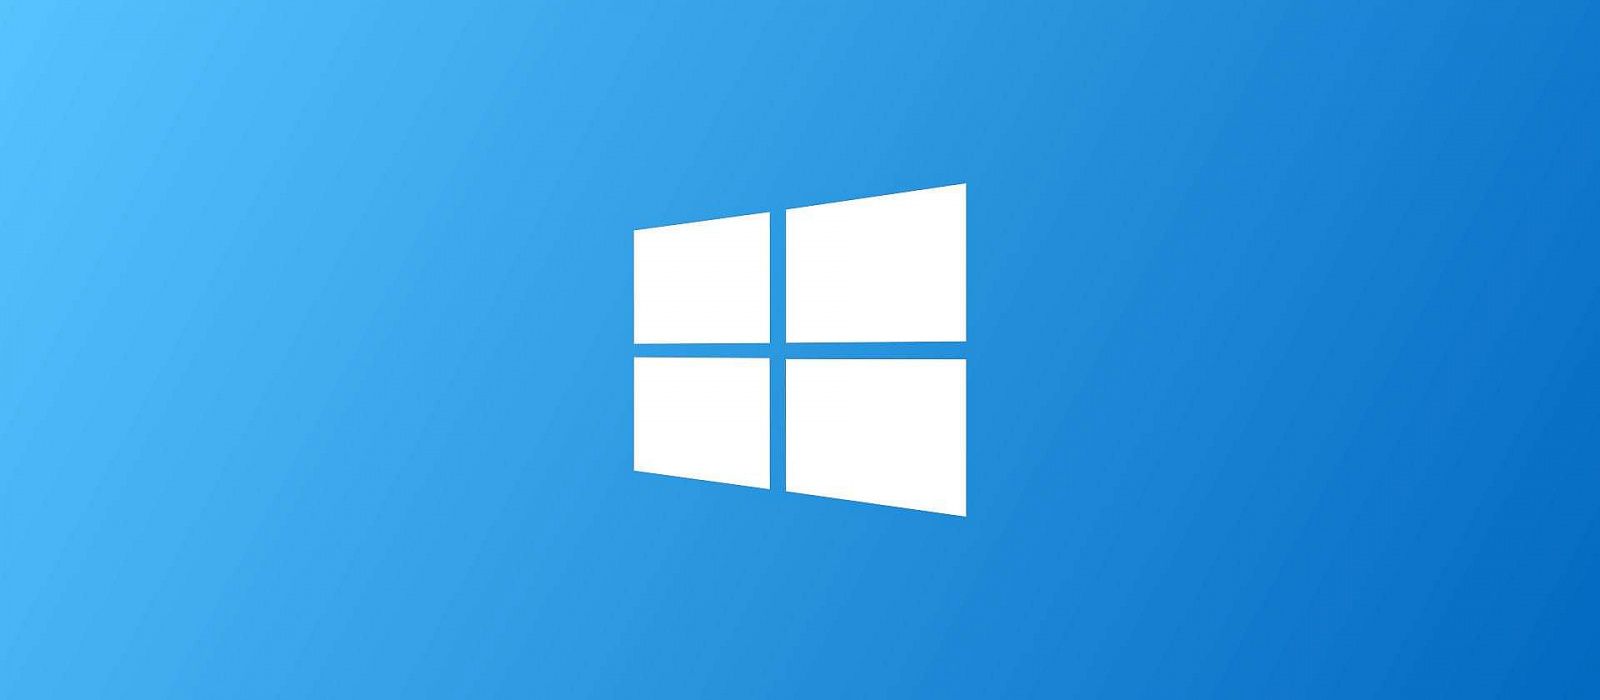 Windows 10 will get technology to speed up game loading from Windows 11